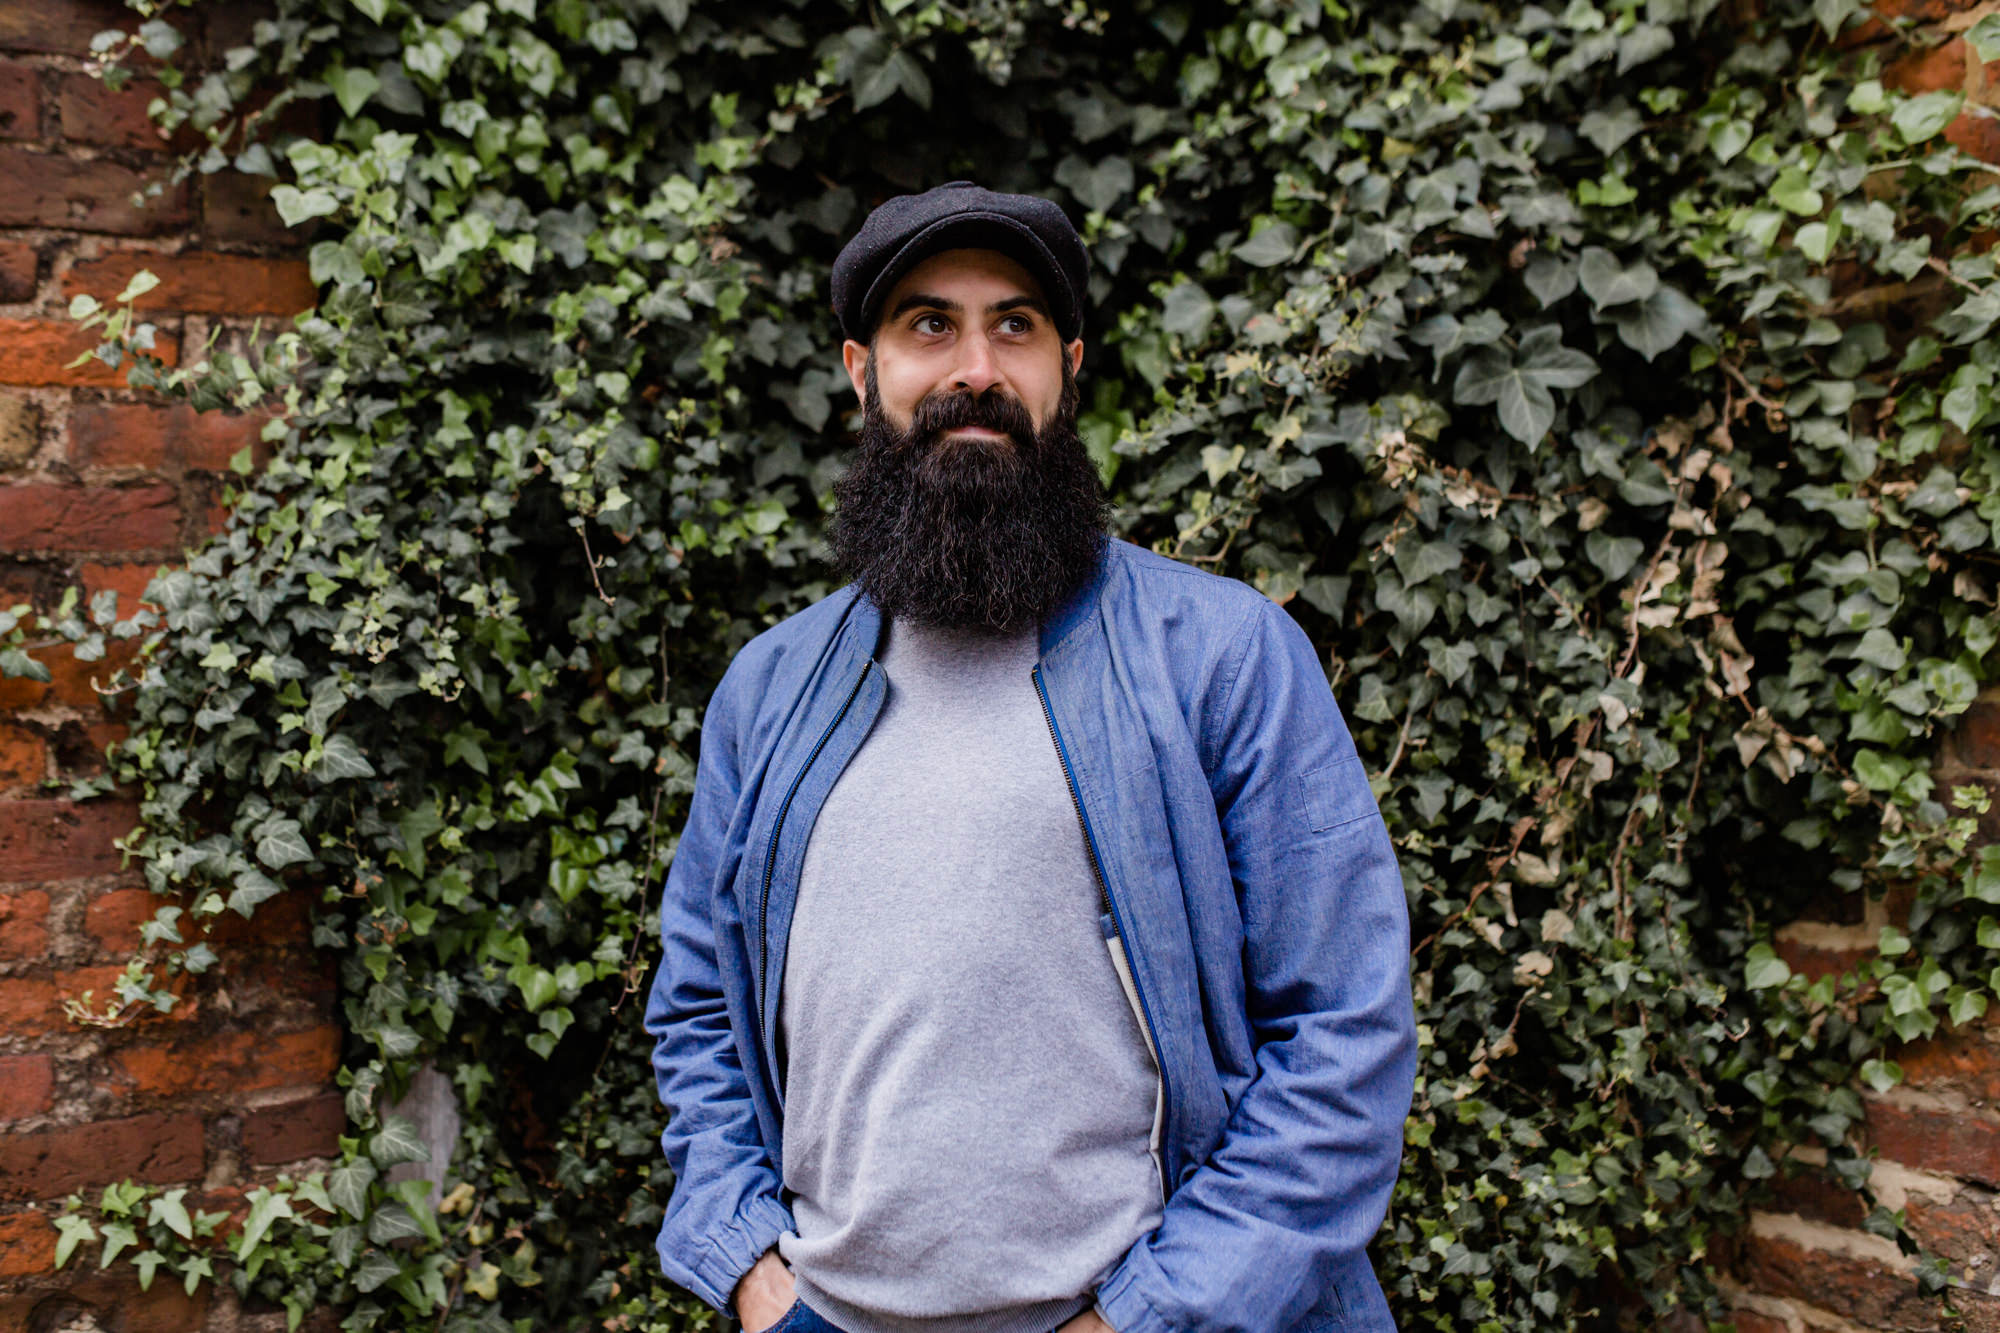 Love Local – Kent Brand Photographer with The Beard of Attraction, Kent